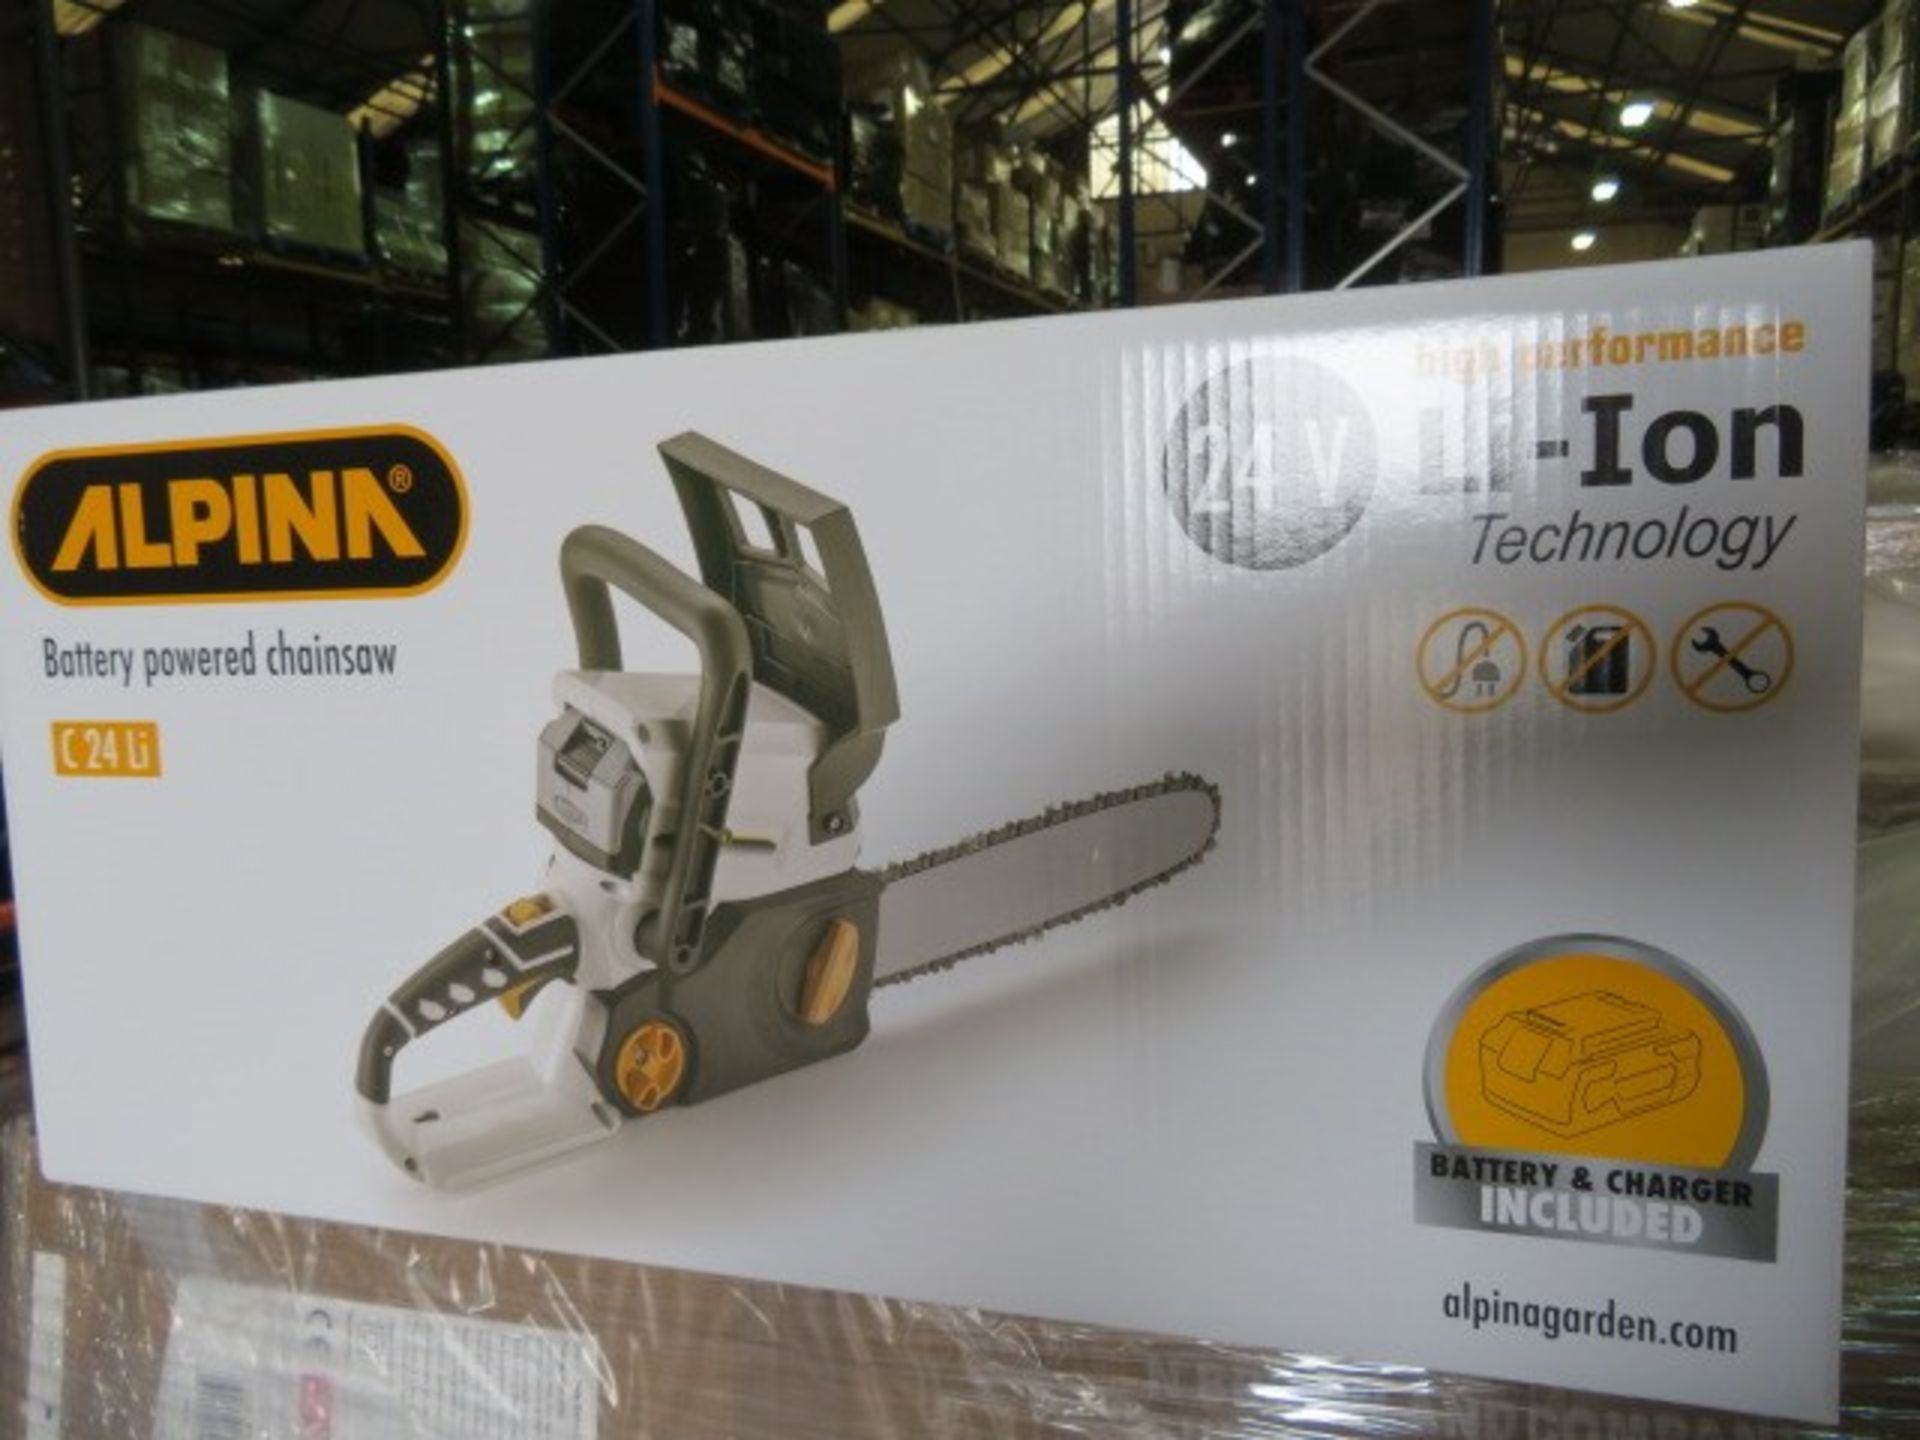 1 x Brand New Boxed Alpina C24LI 24V Li-ion Battery Powered Chainsaw With 4Ah Battery. RRP £199.00.